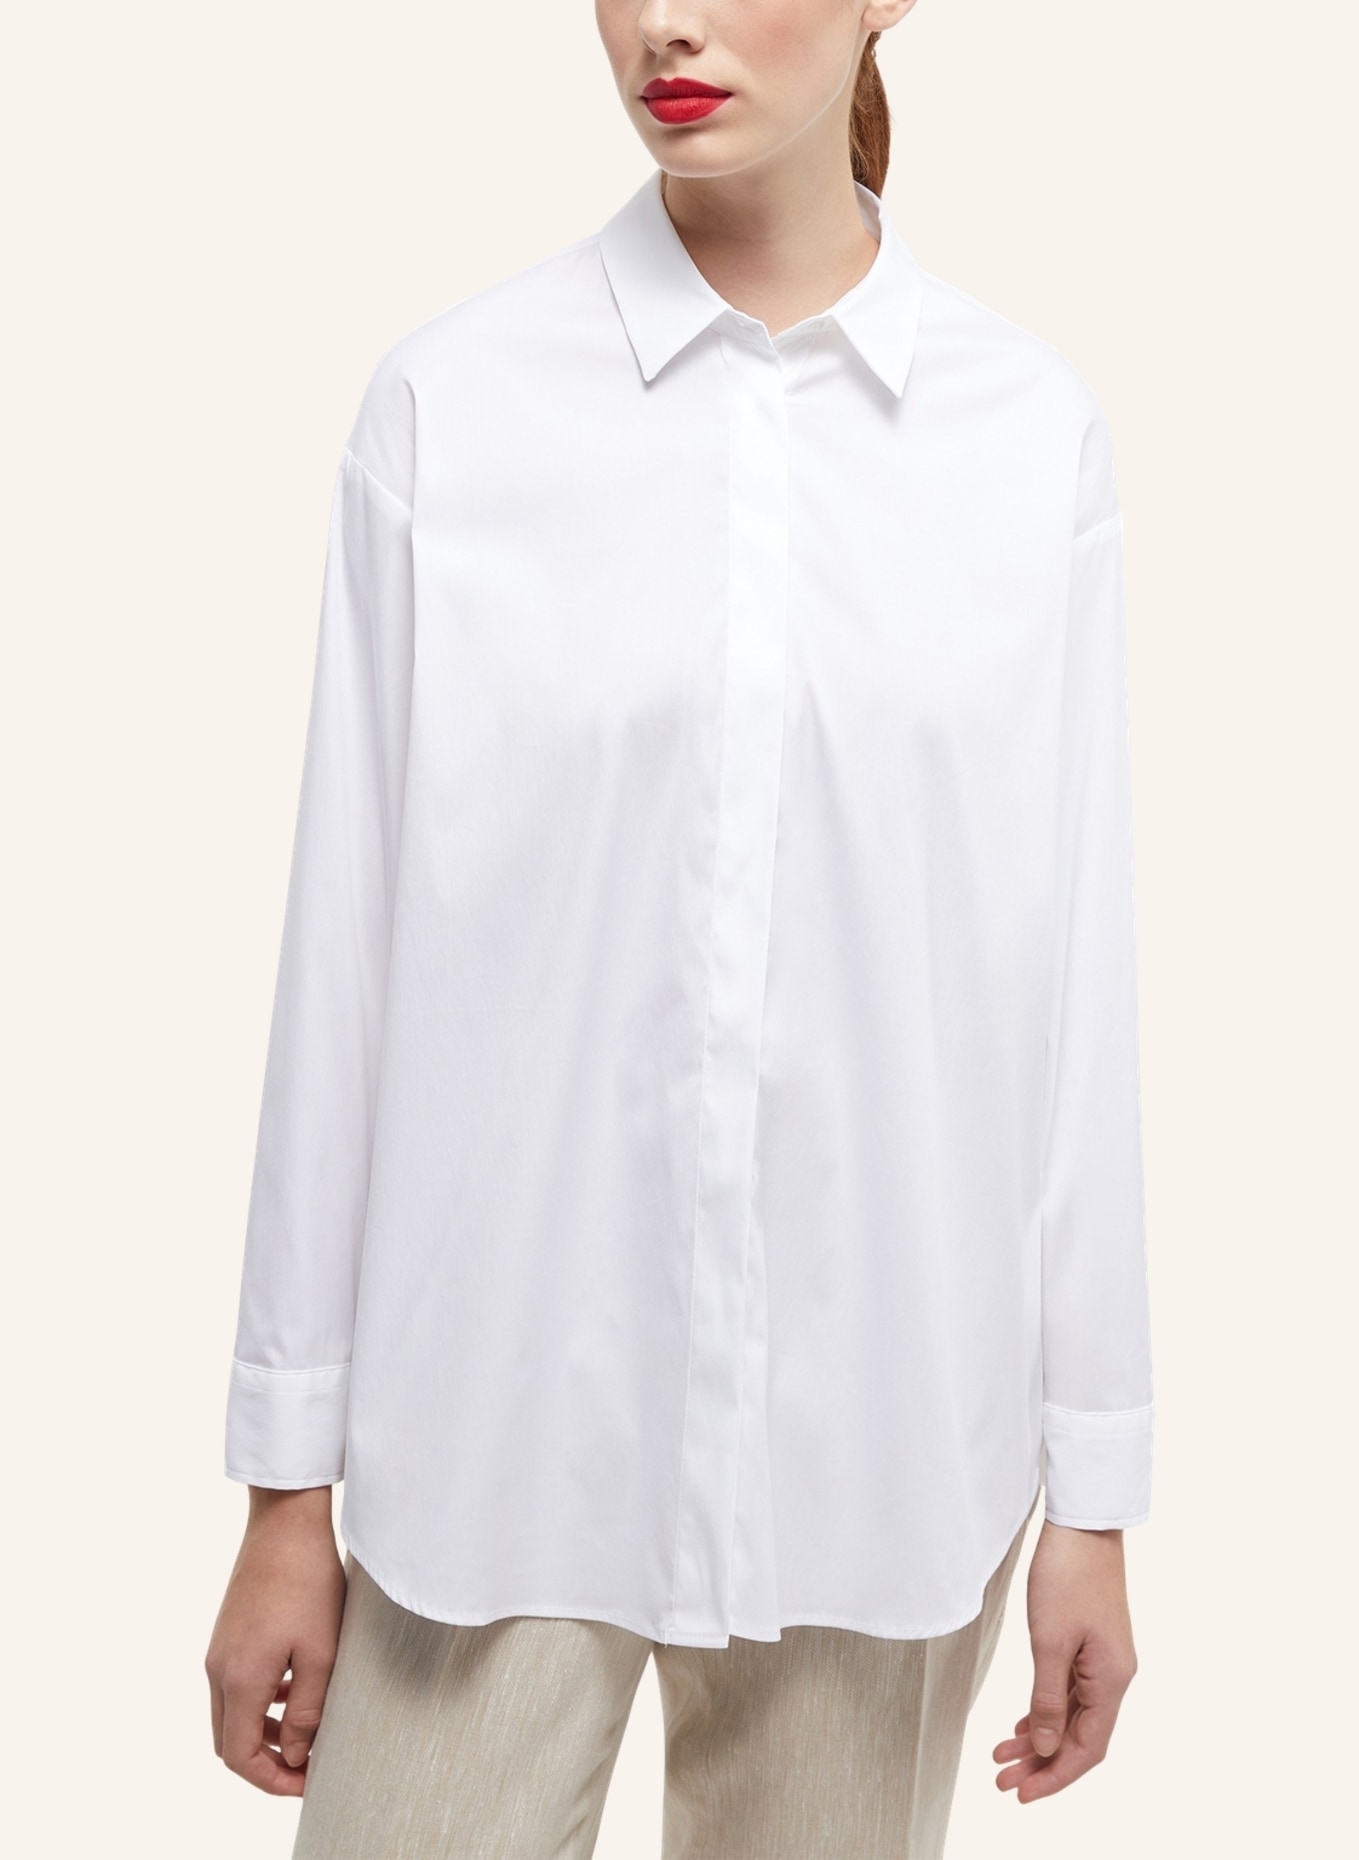 OVERSIZE in Bluse FIT weiss ETERNA